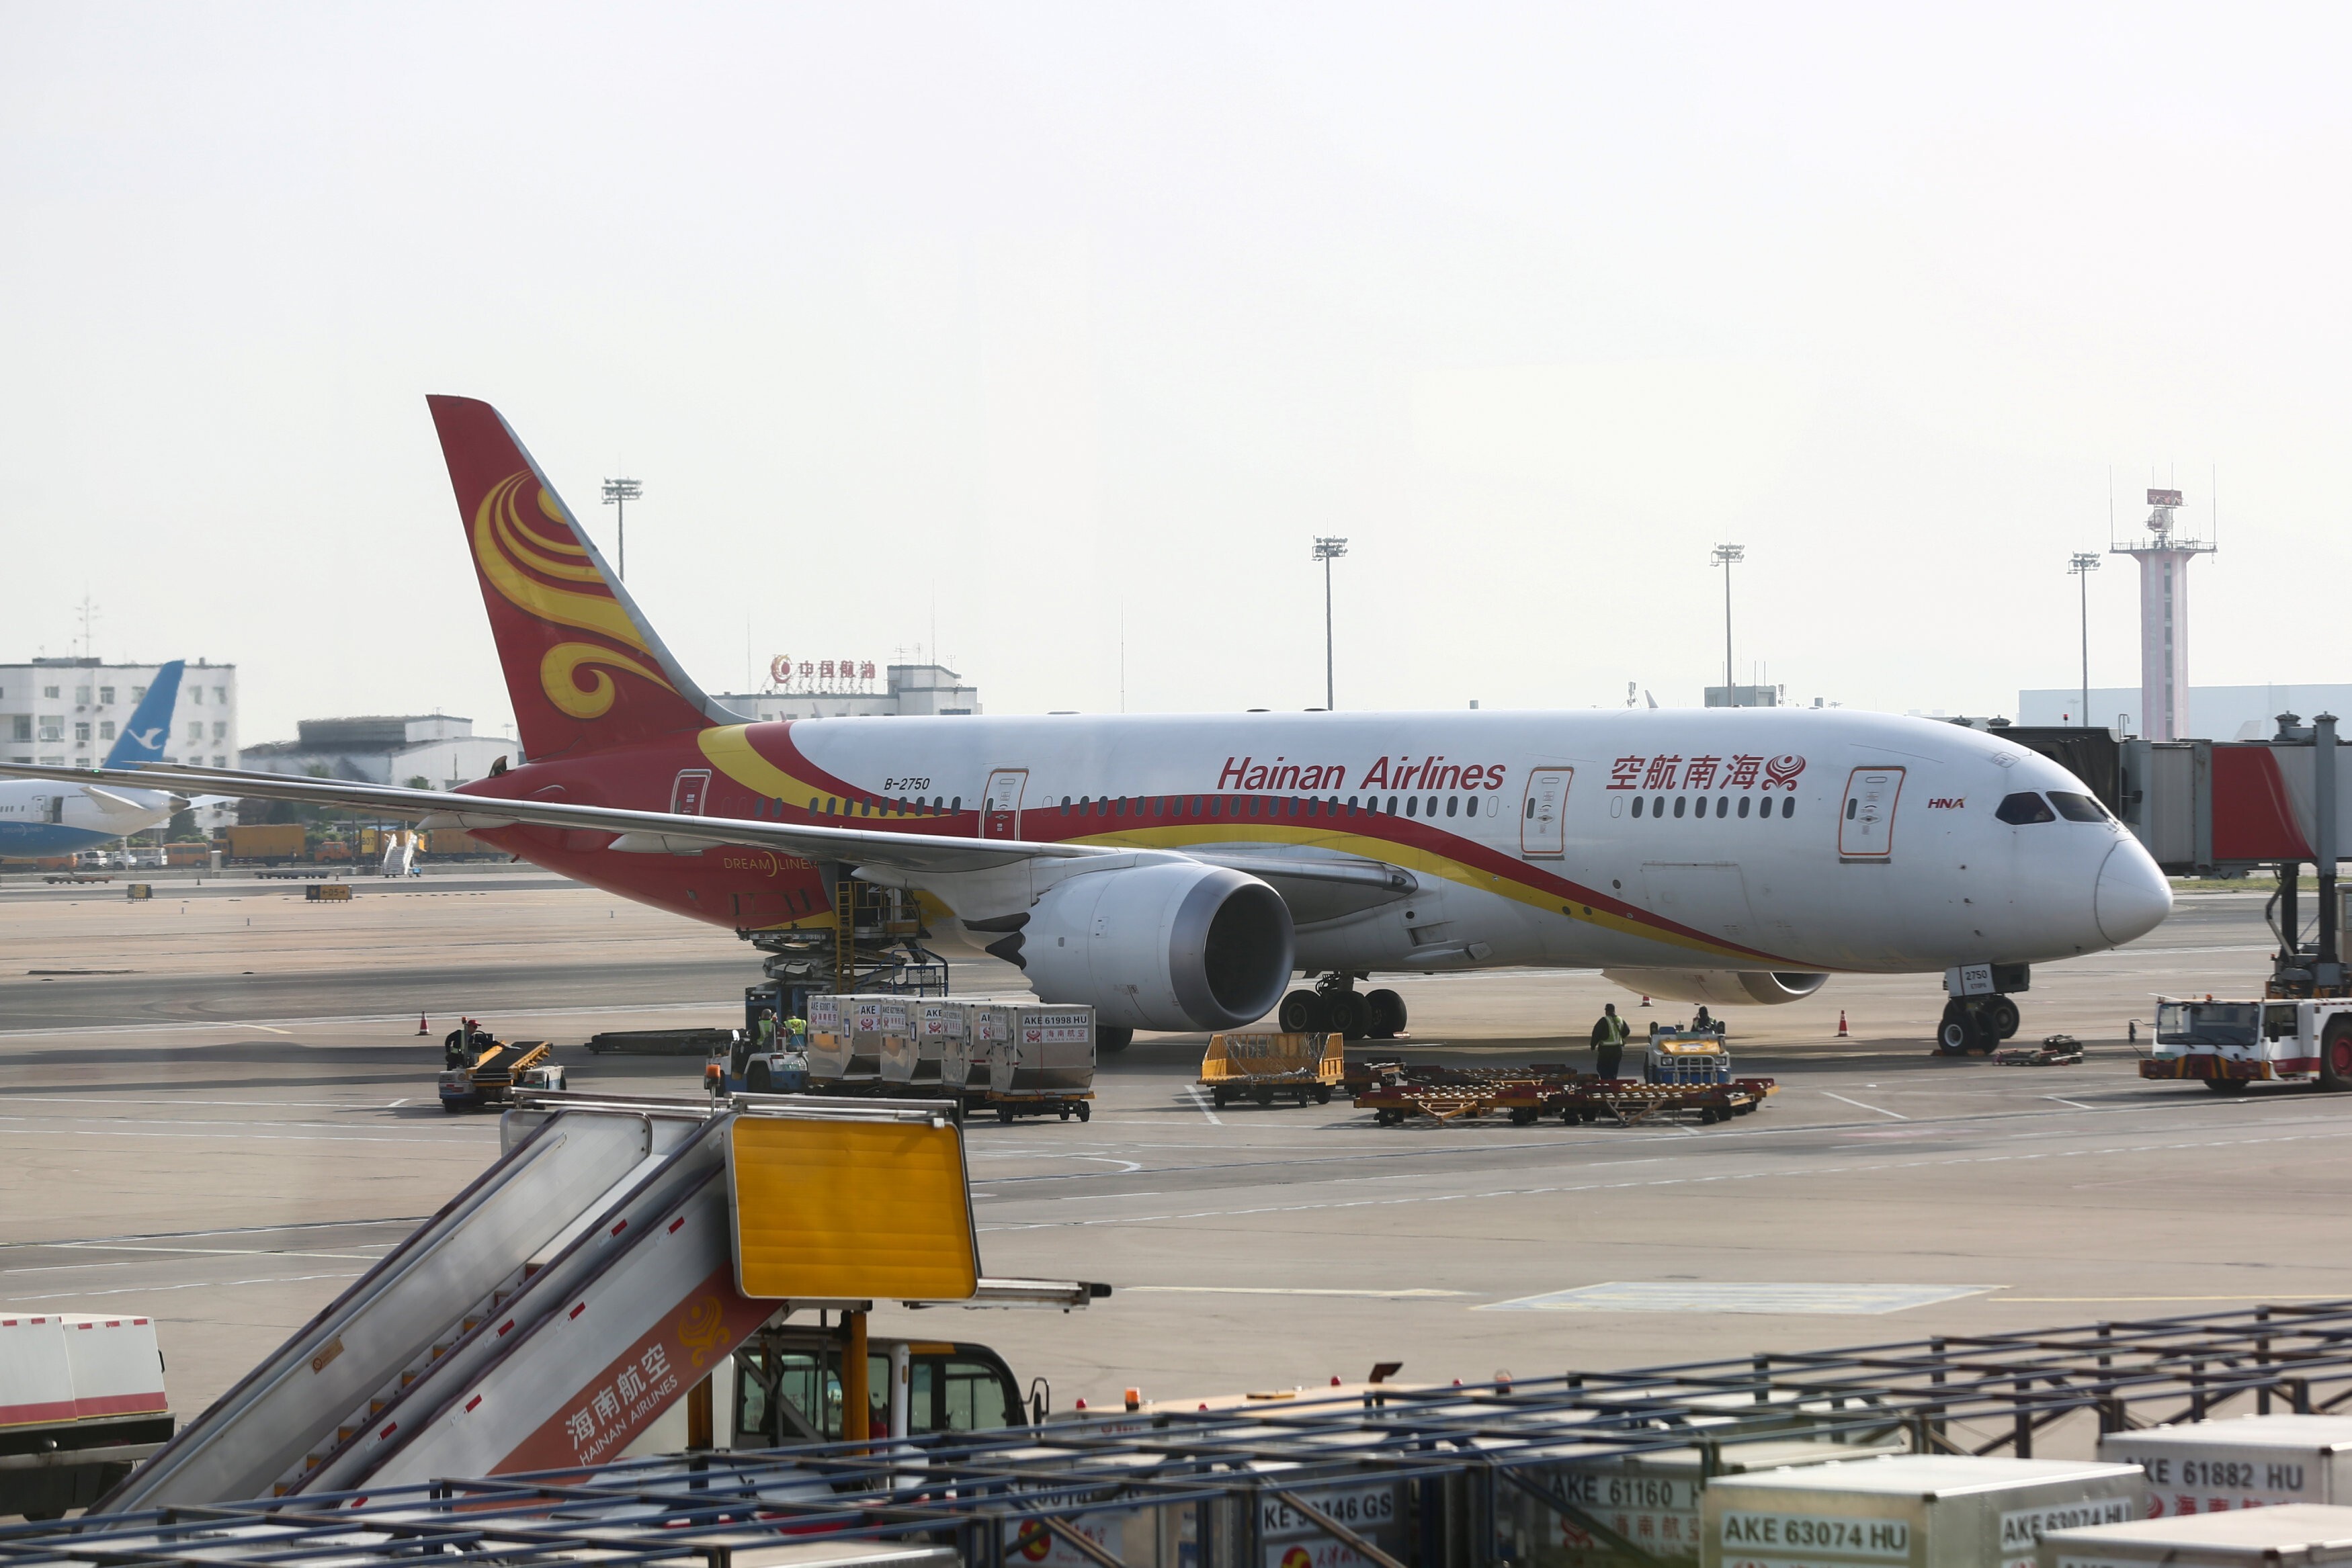 A Hainan Airlines aircraft sits on the tarmac in Beijing on May 13, 2018. Photo: Reuters